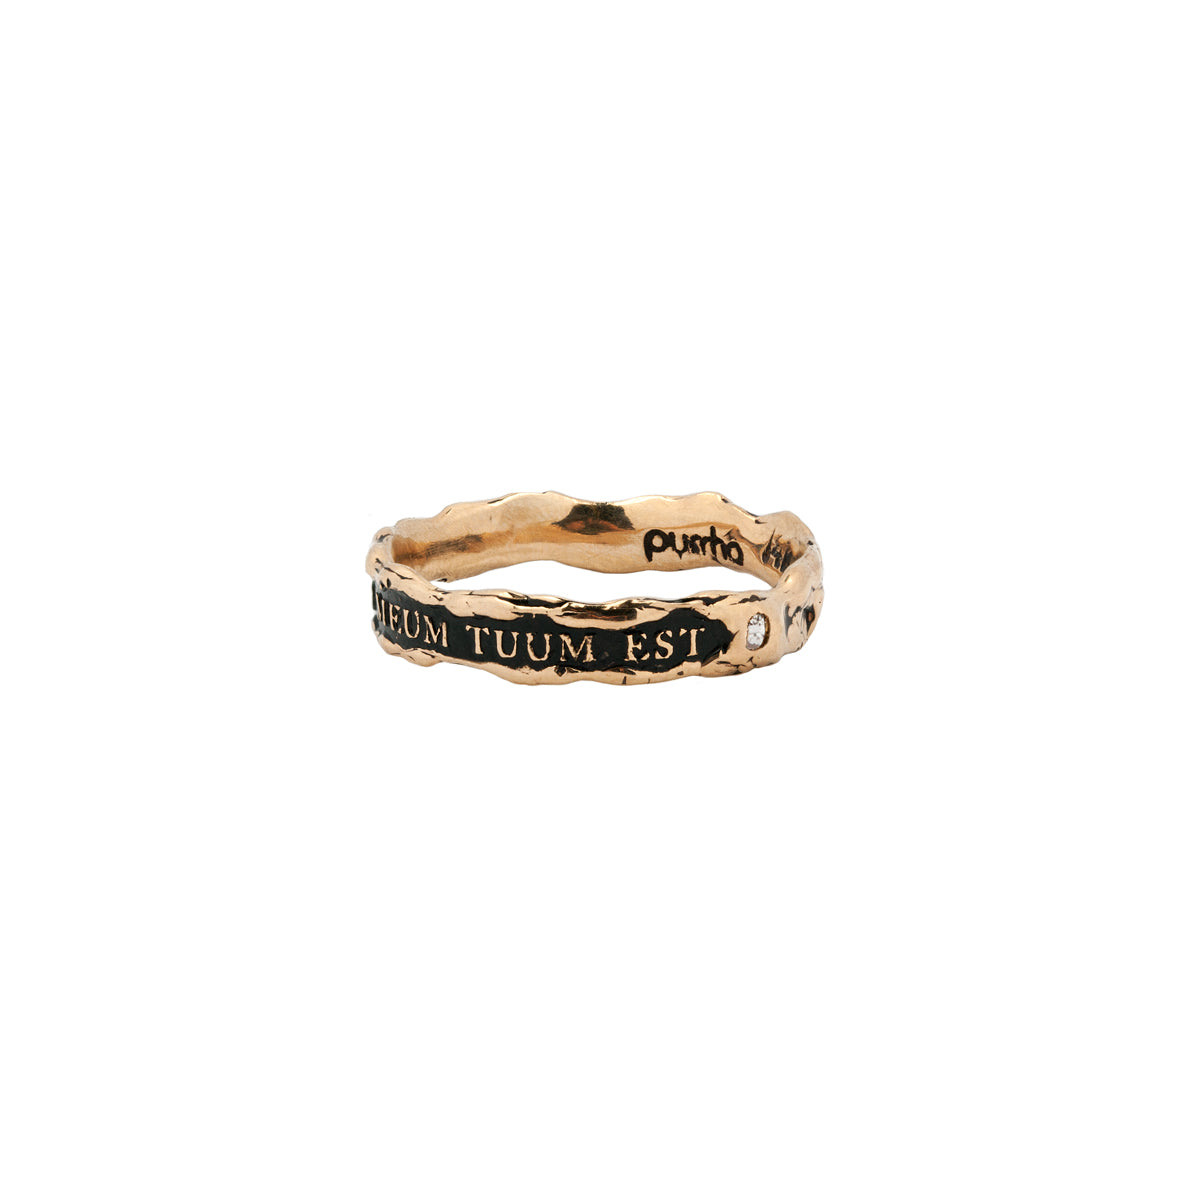 My Heart is Yours Narrow 14K Gold Stone Set Textured Band Ring